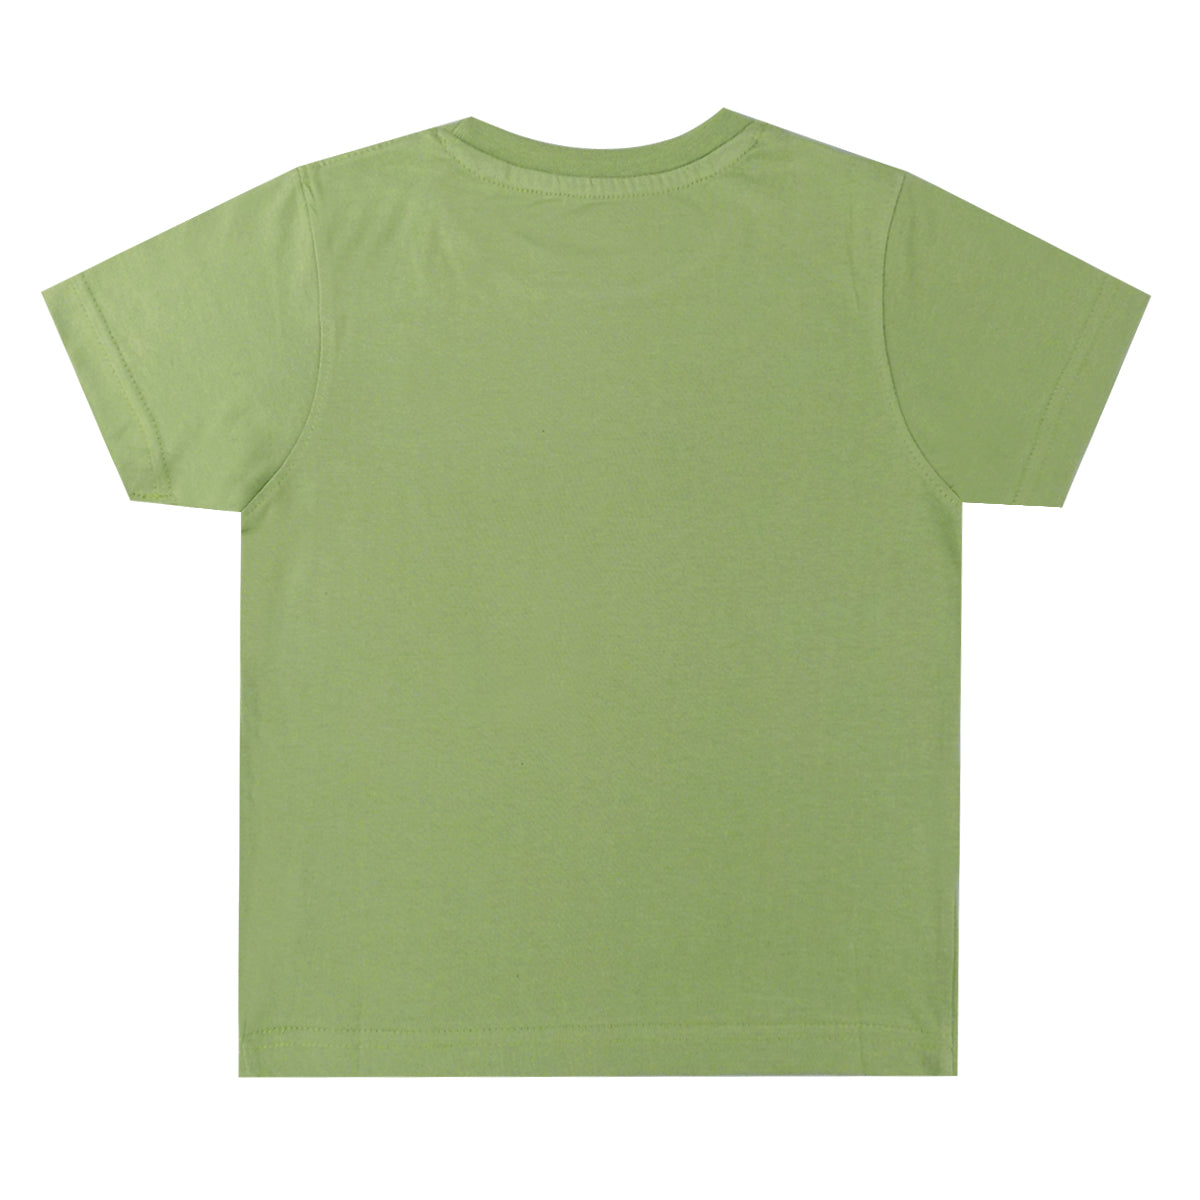 I Have Awesome - Premium Round Neck Cotton Tees for Kids - Parrot Green